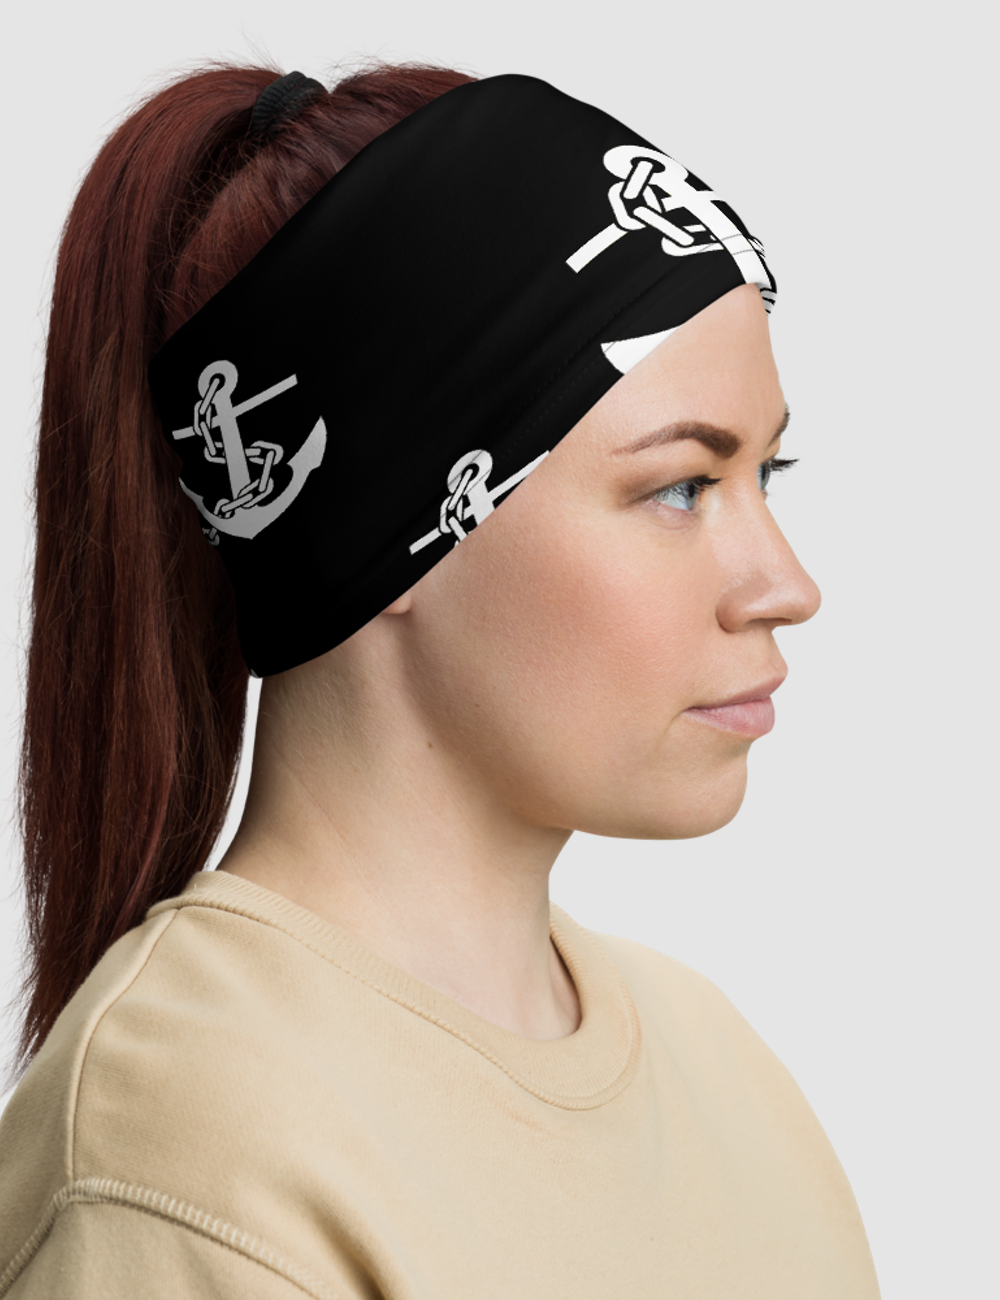 Chained Sea Anchors | Neck Gaiter Face Mask OniTakai